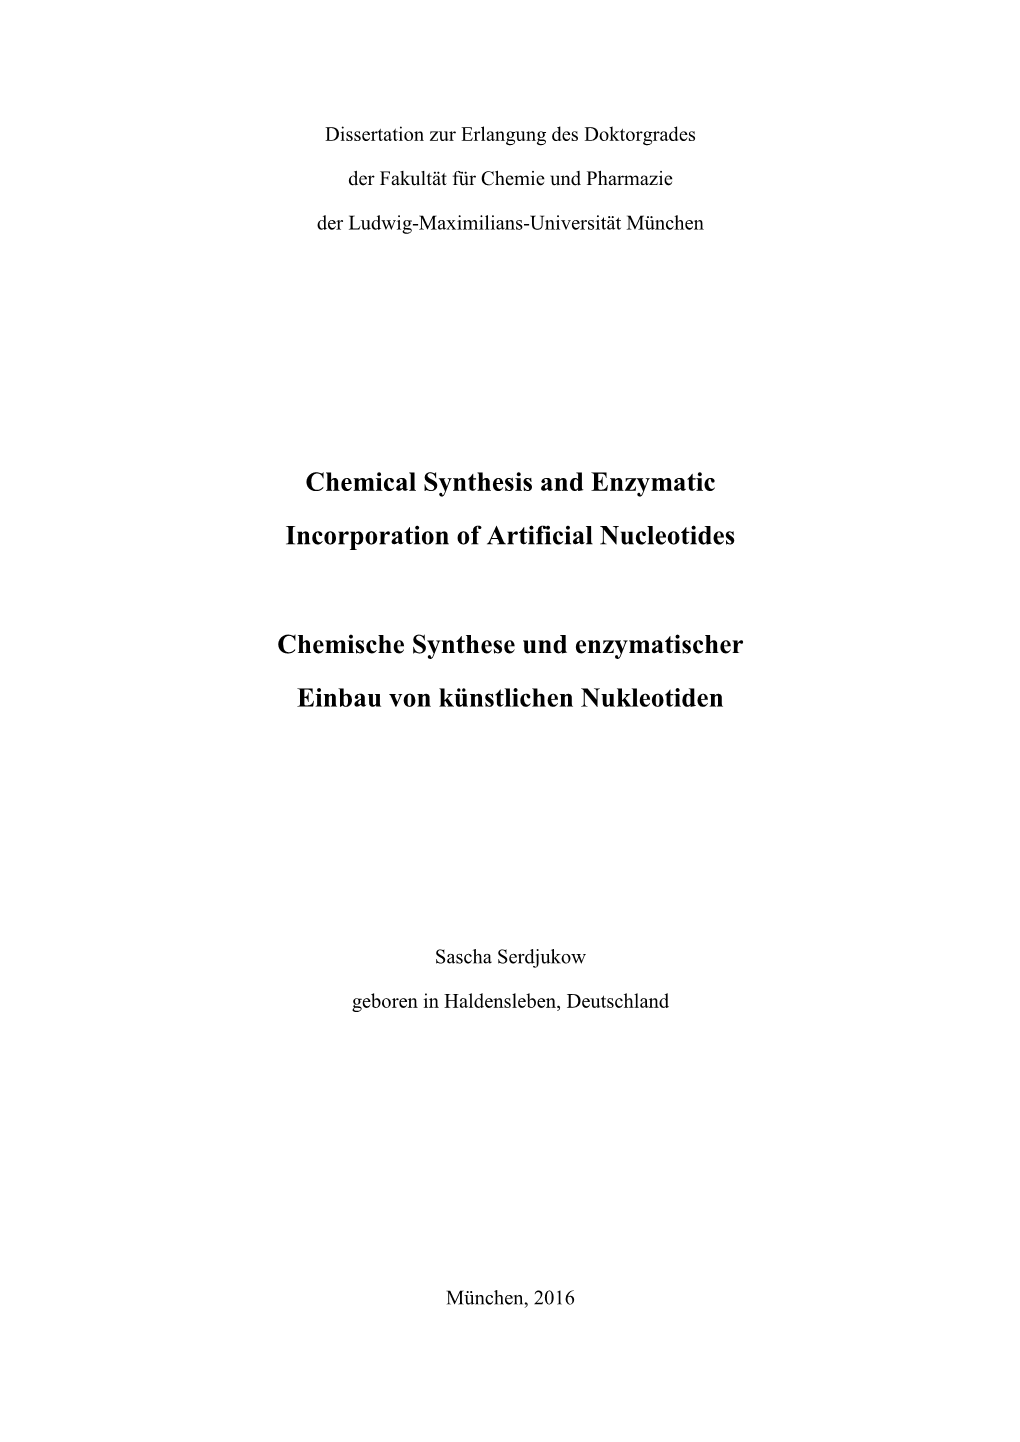 Chemical Synthesis and Enzymatic Incorporation of Artificial Nucleotides